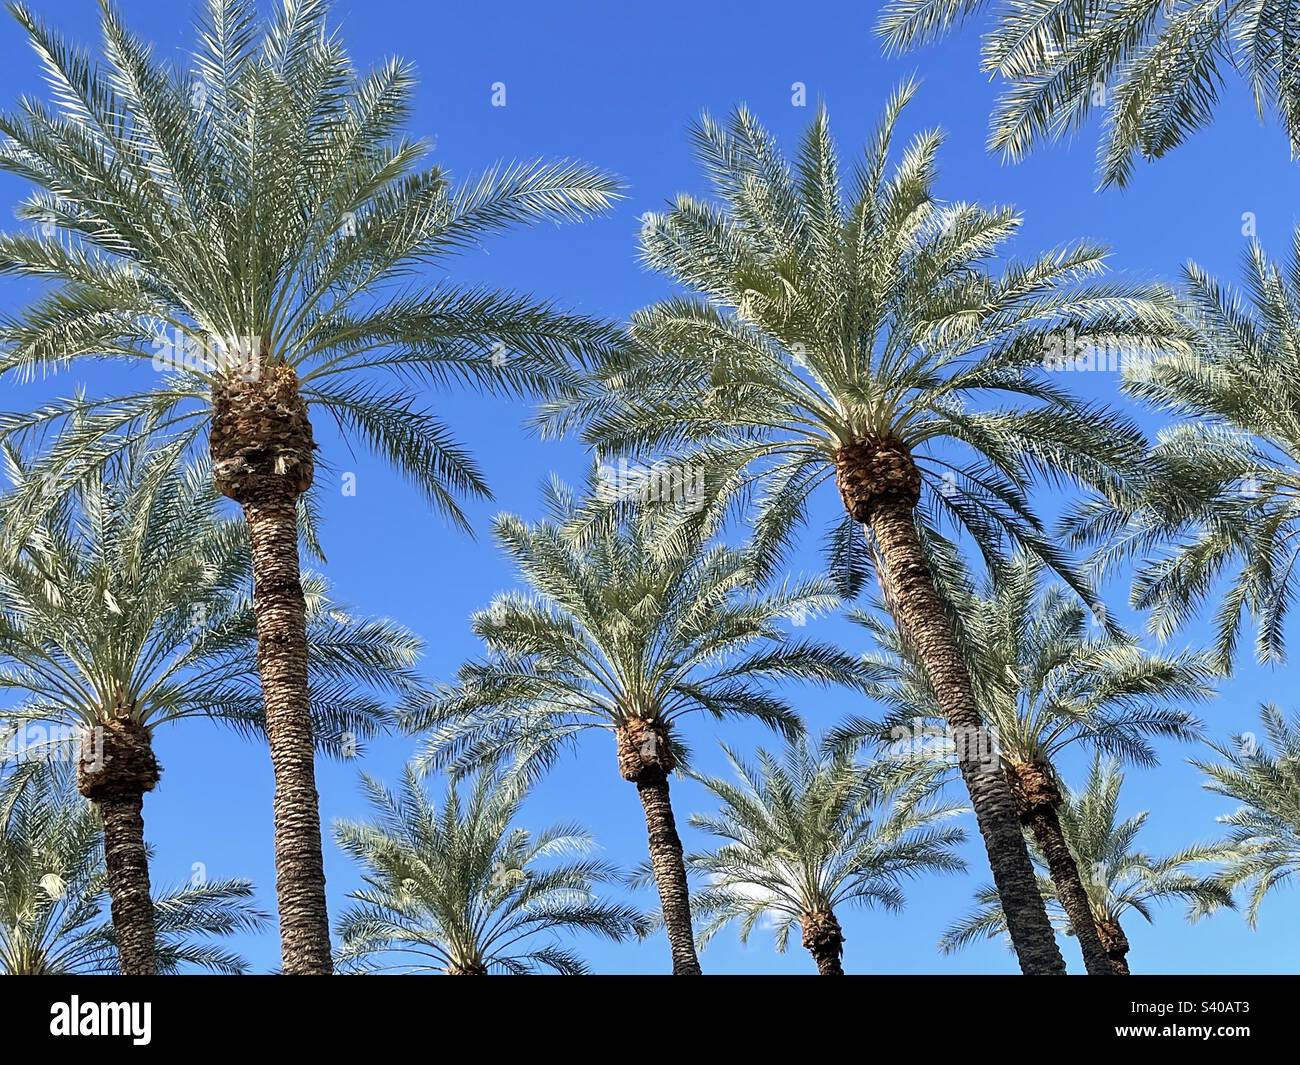 Palm trees at angle view Stock Photo